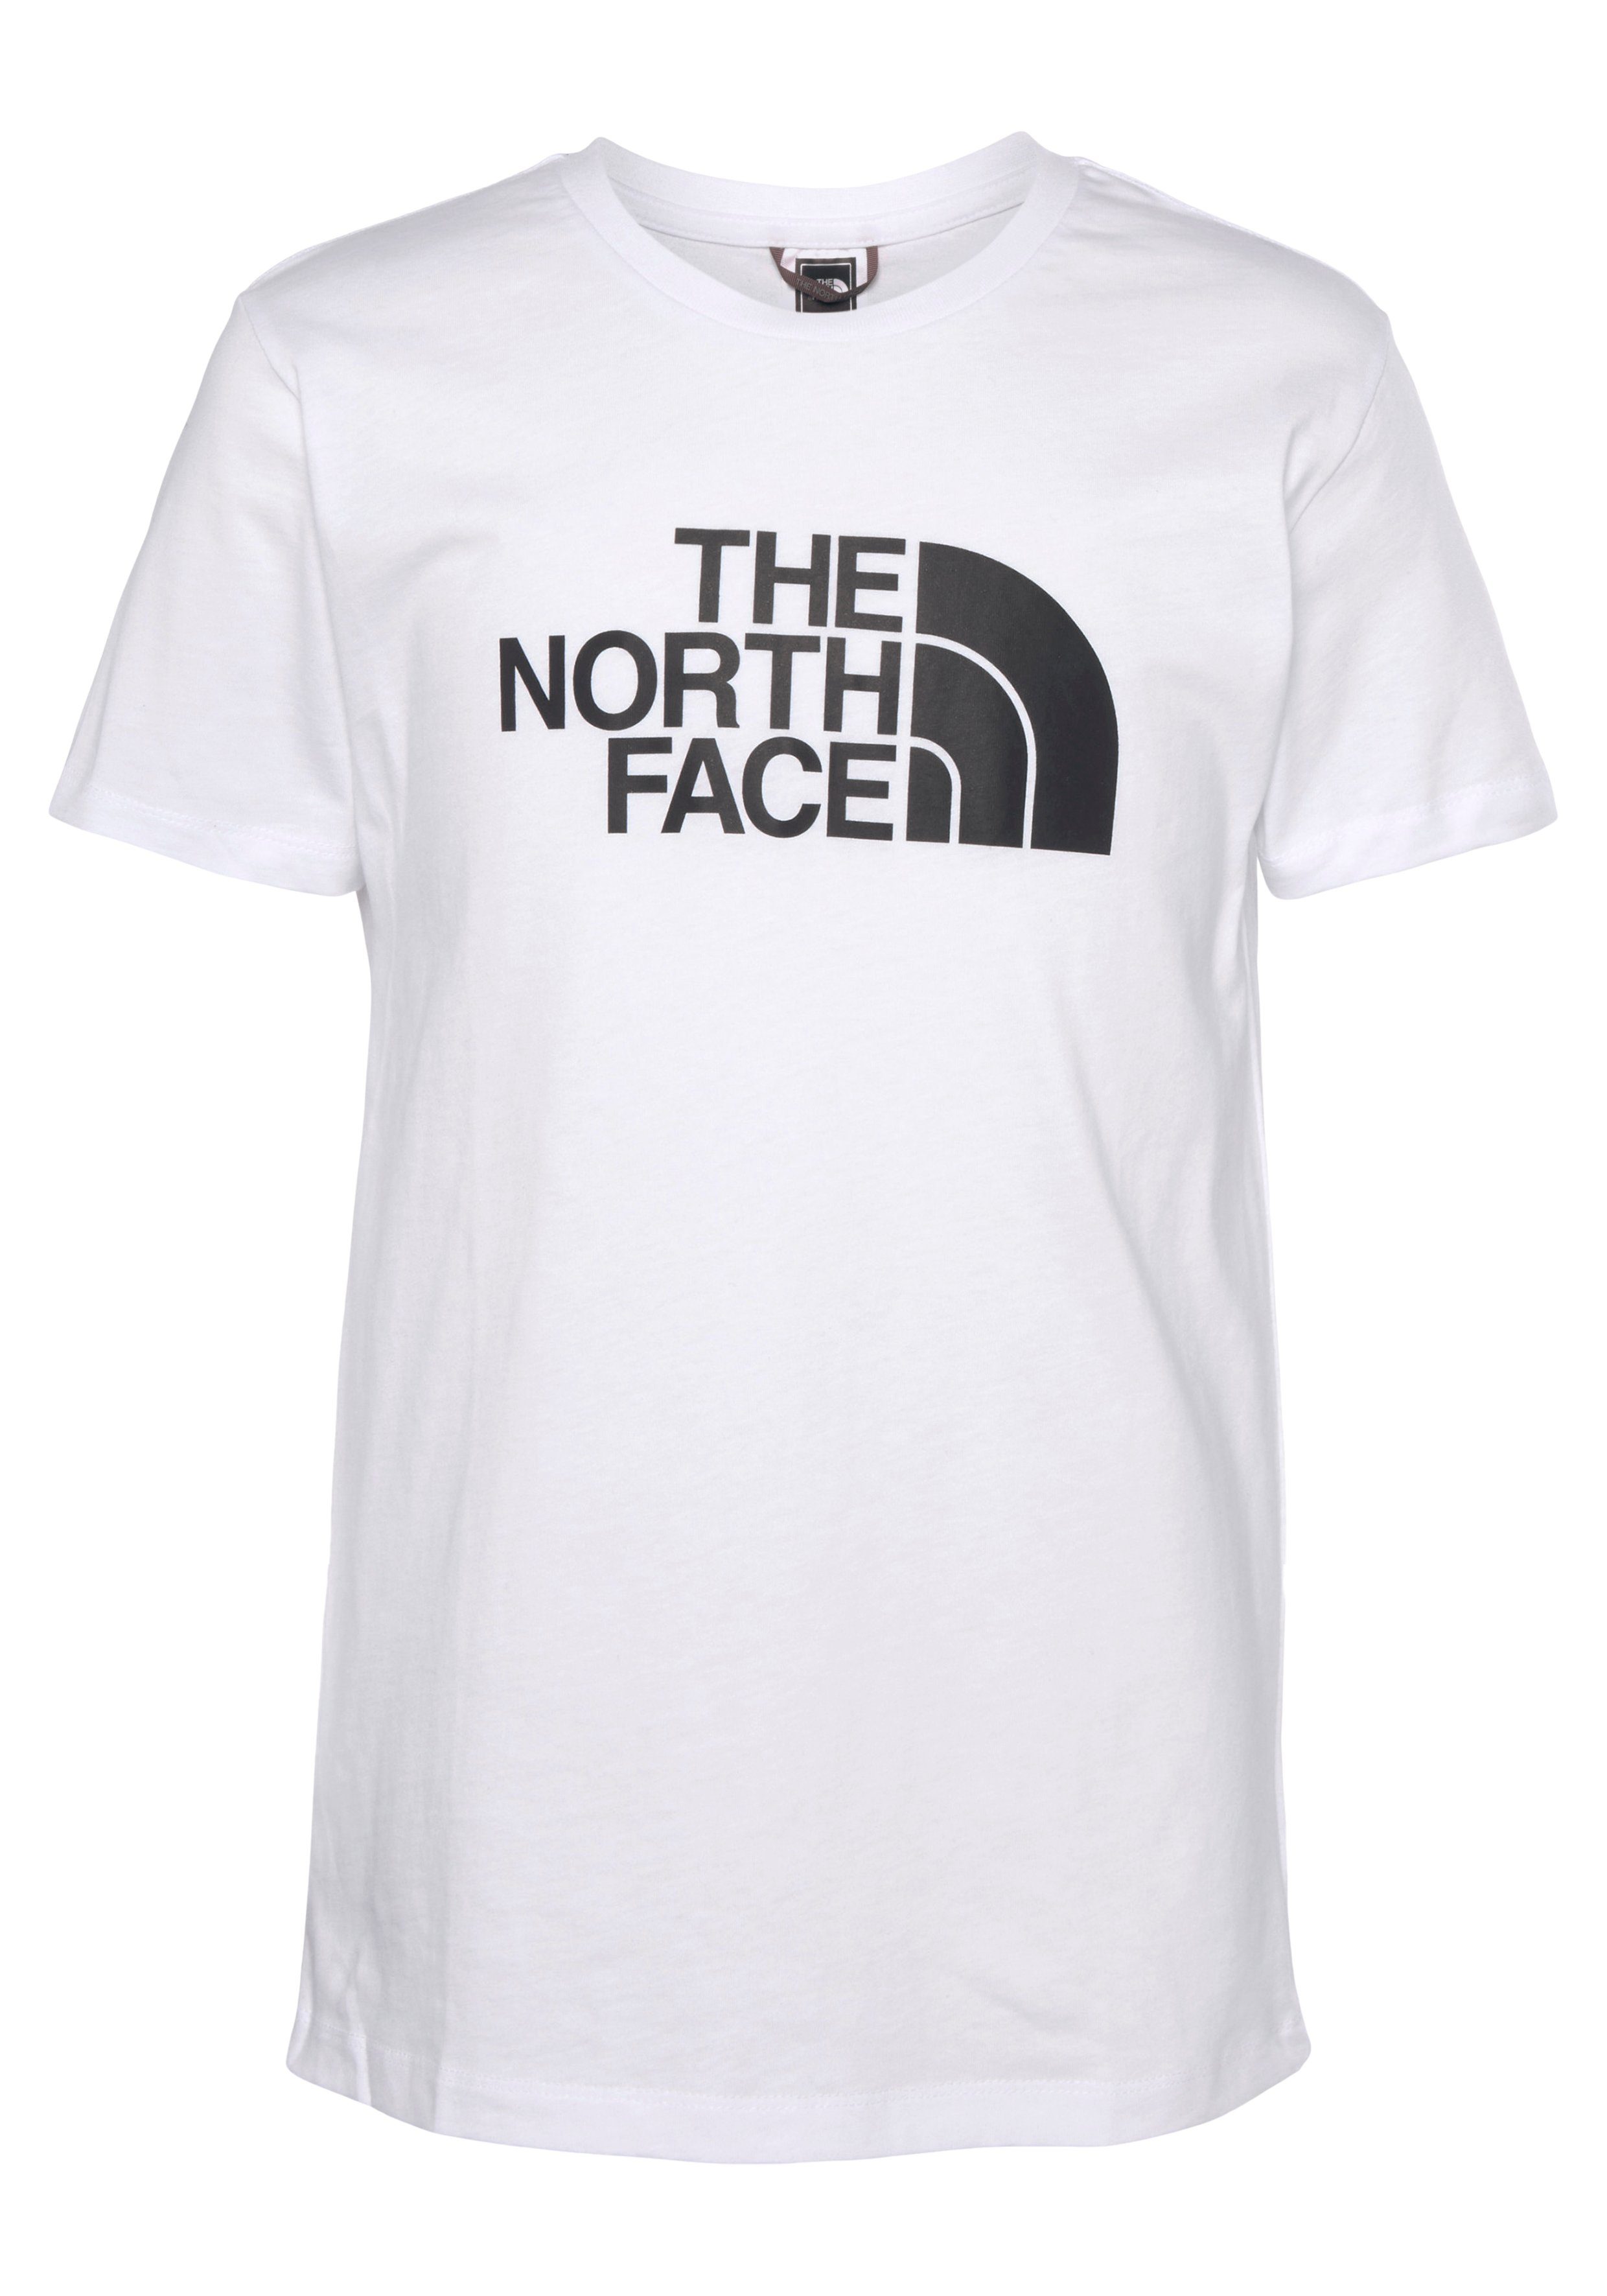 Kinder TEE Face - EASY The white T-Shirt North für